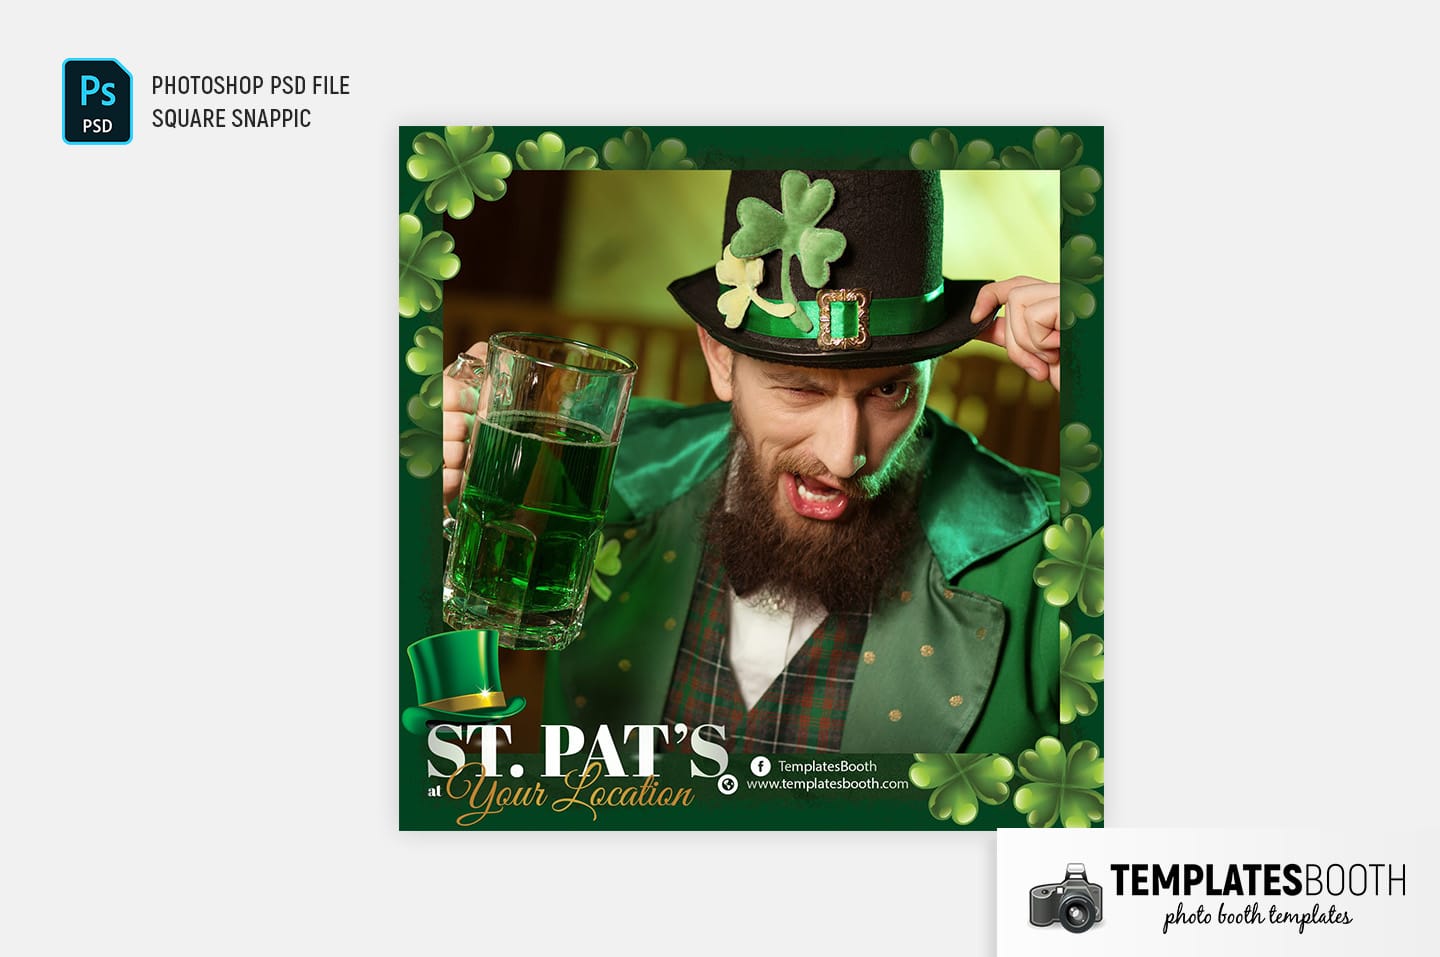 Saint Patrick's Day Photo Booth Template (for Snappic)